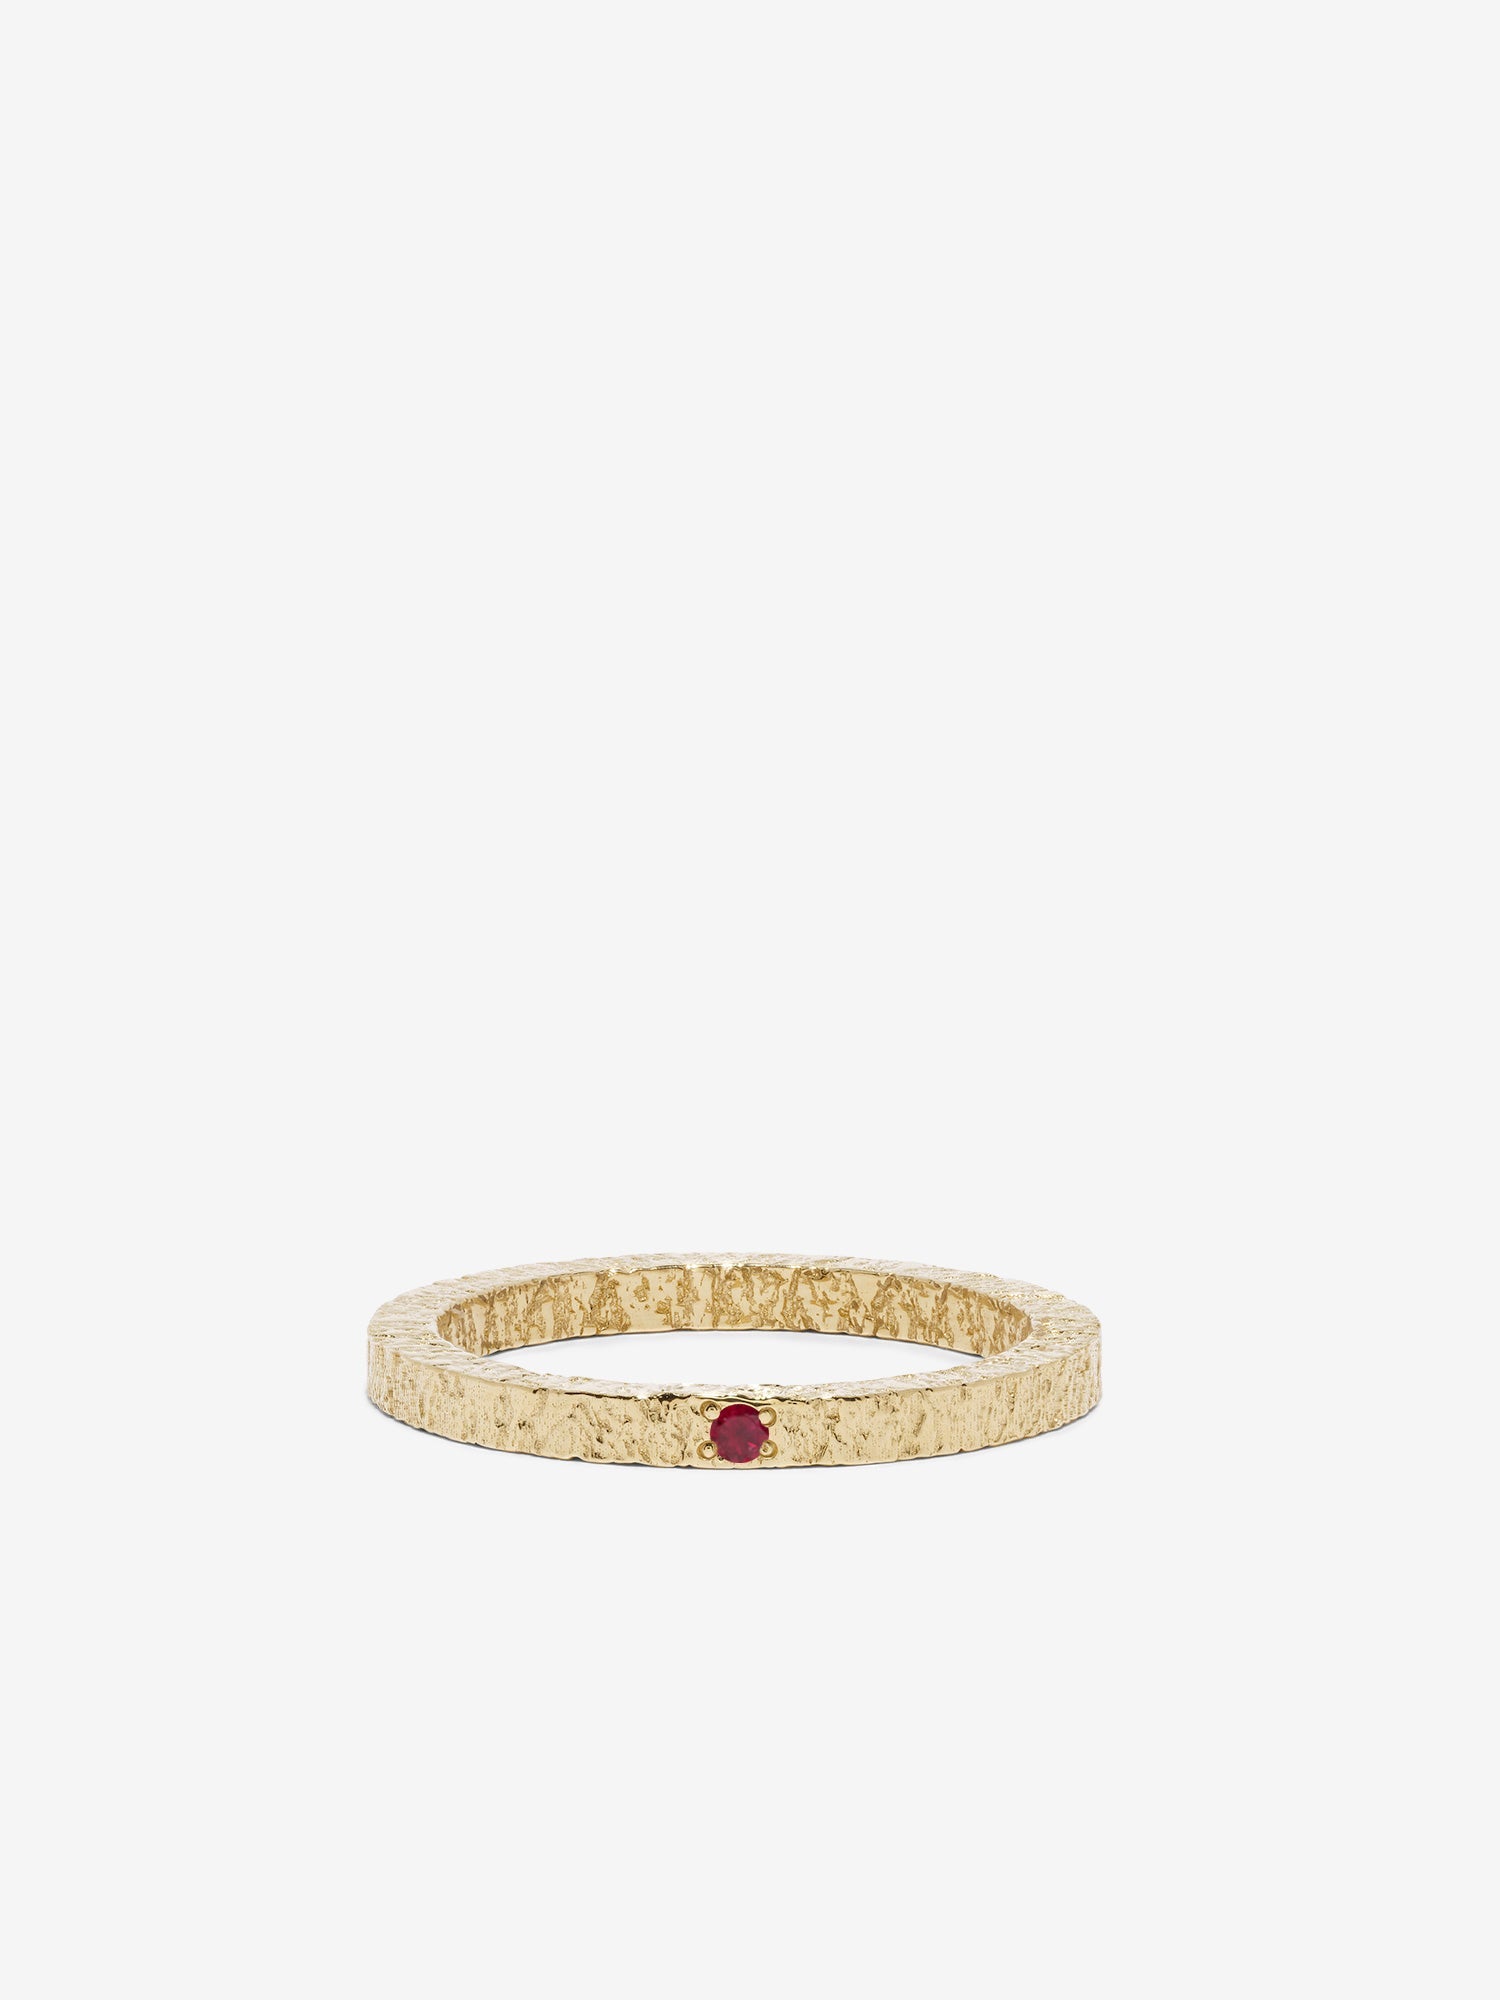 Petite Textured Ruby Band